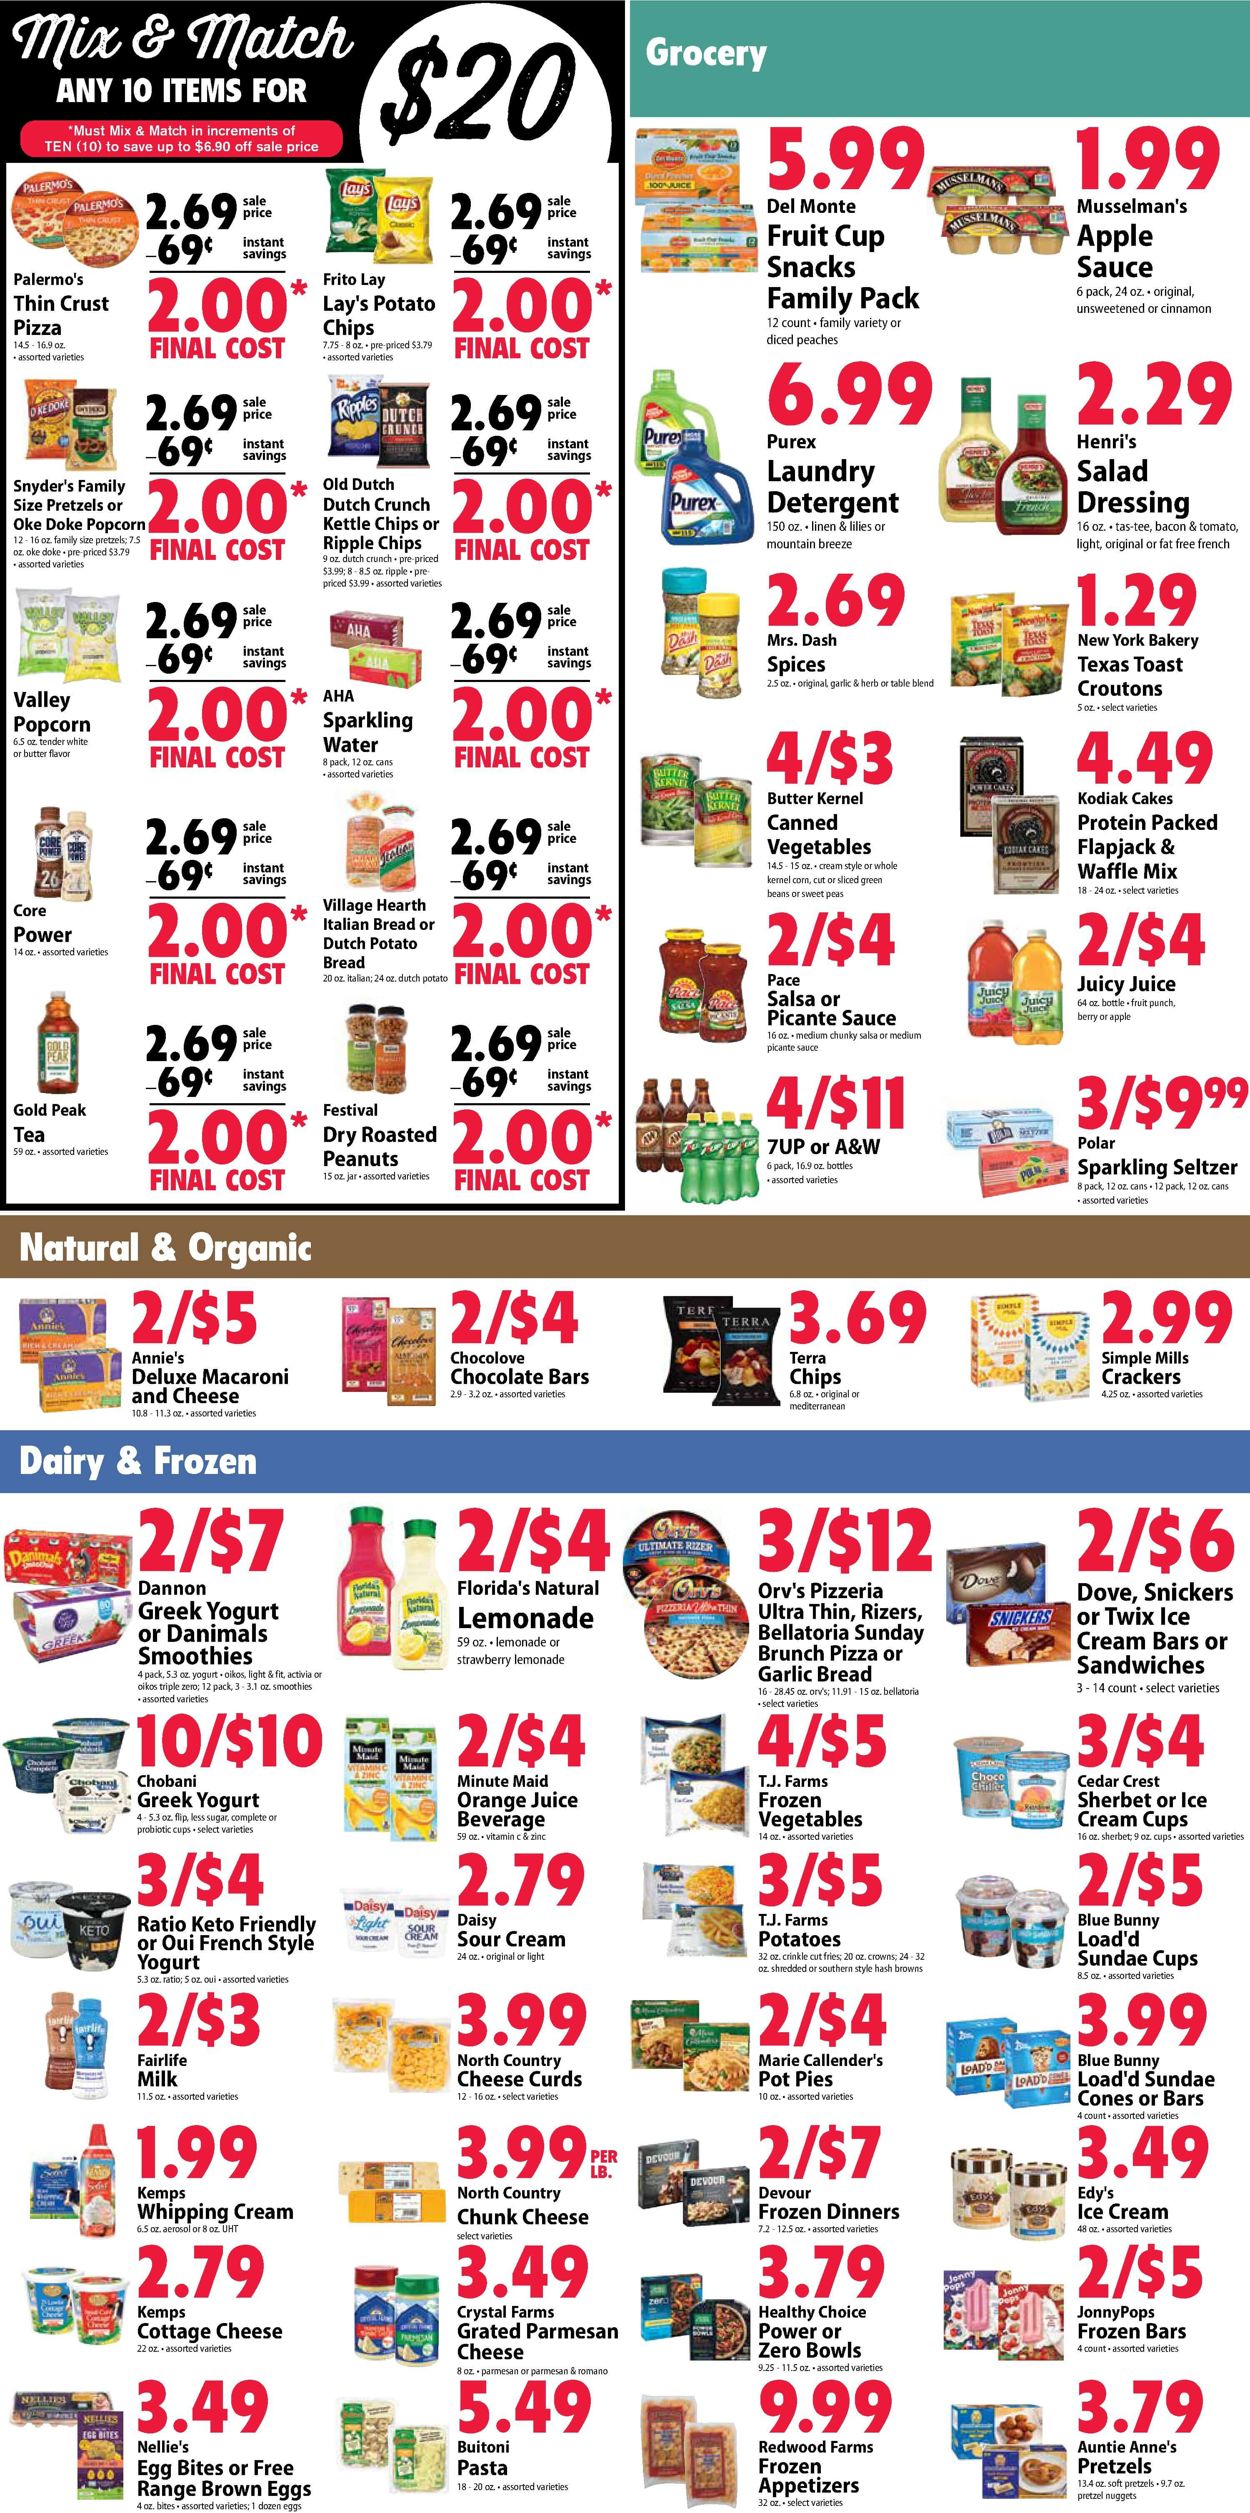 Festival Foods Current weekly ad 08/11 08/17/2021 [3]